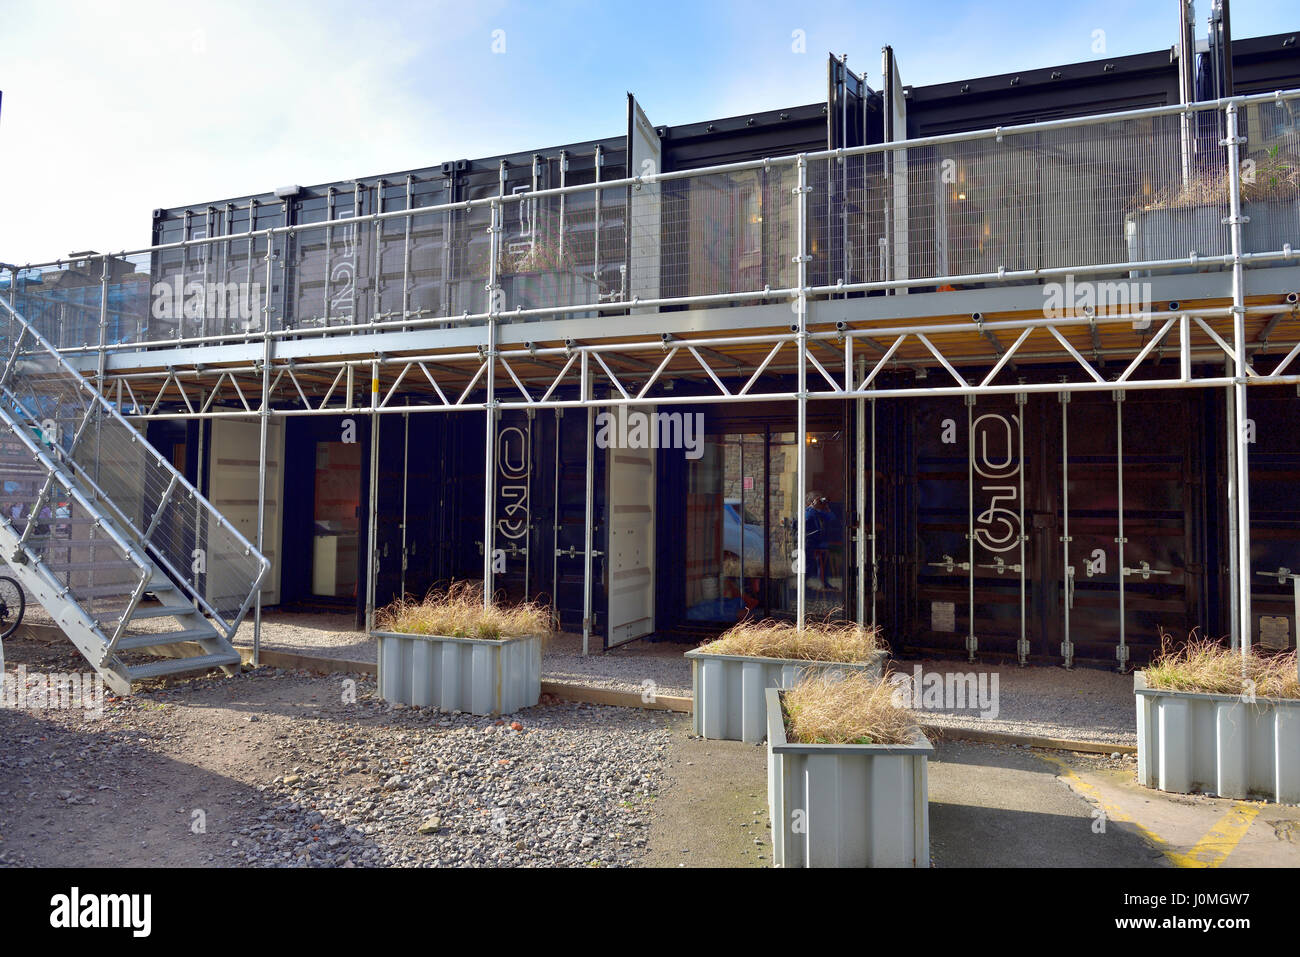 Engine Shed Boxworks temporary small business office space constructed out of shipping containers, Bristol, St Philip's Marsh, Temple Meads, UK Stock Photo